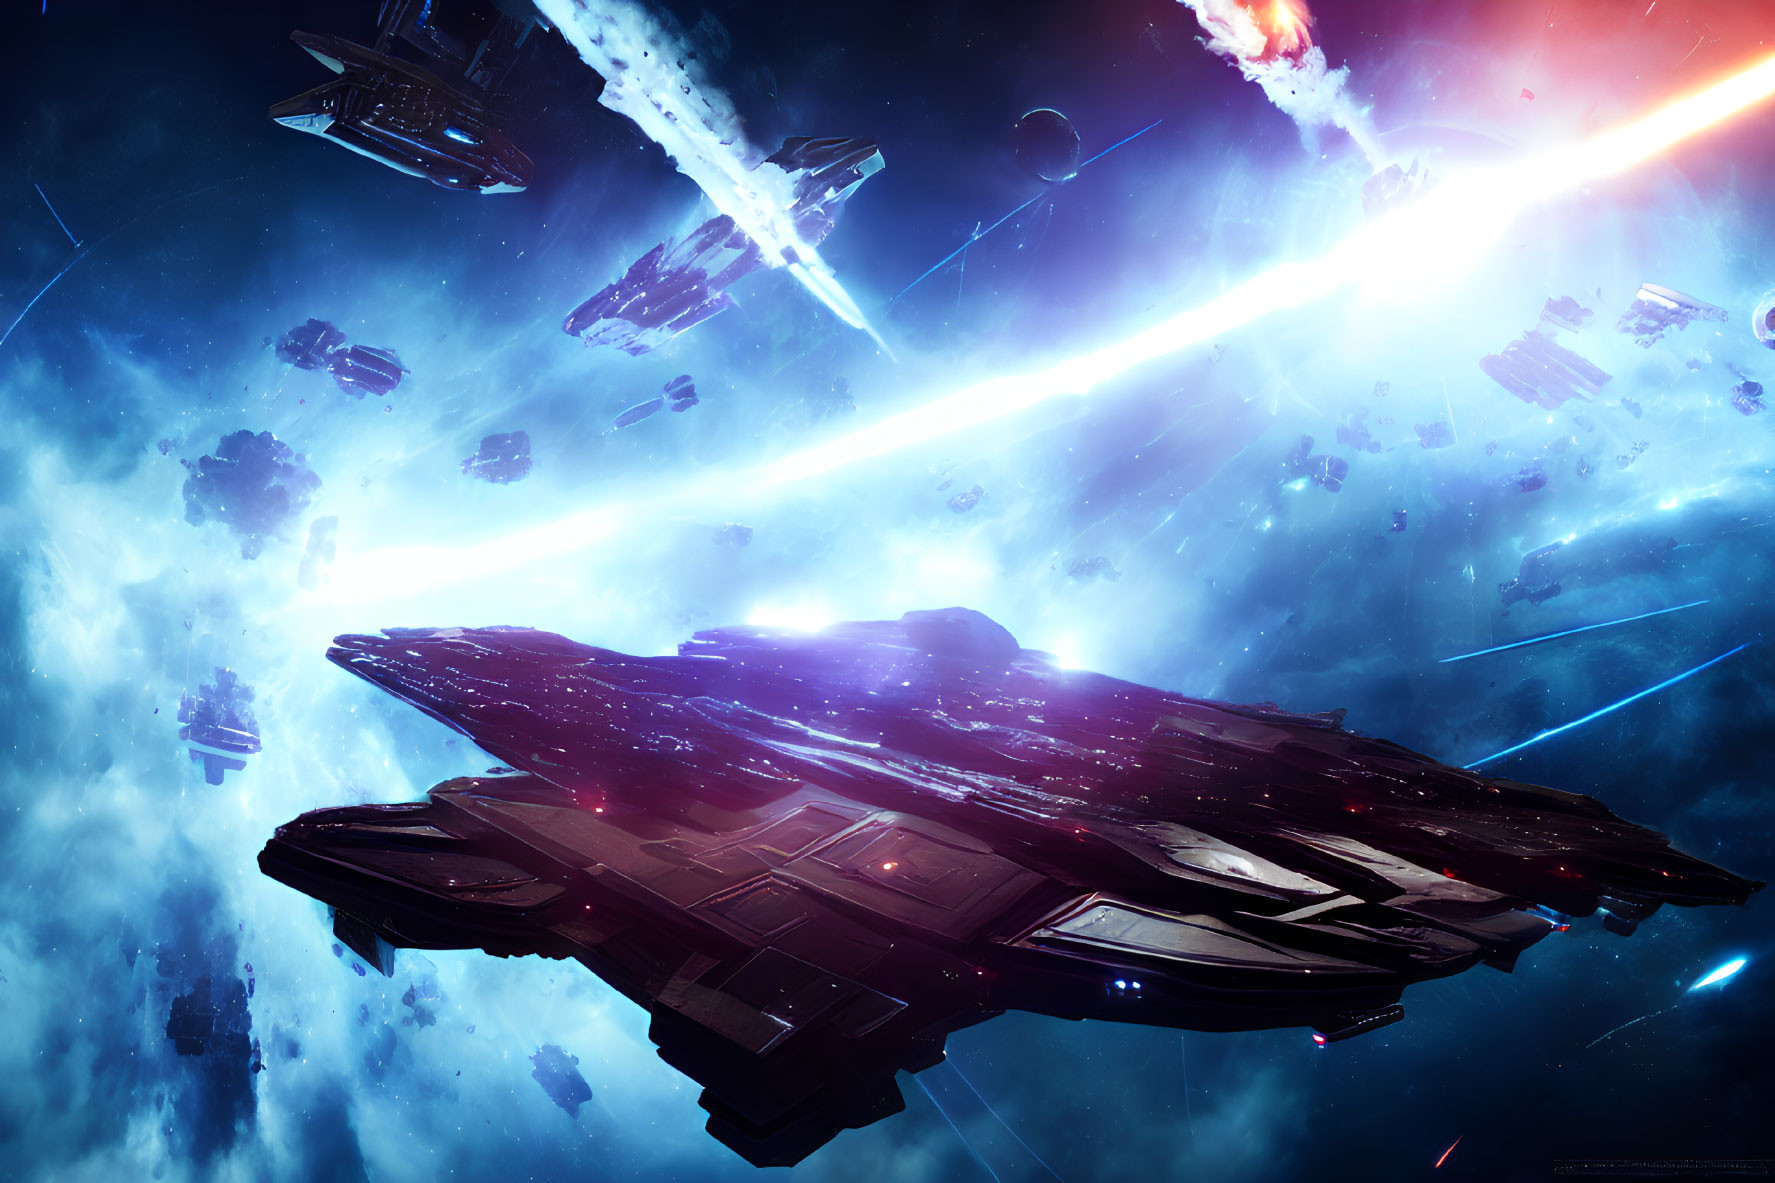 Futuristic space battle with vibrant cosmic backdrop and energy beams